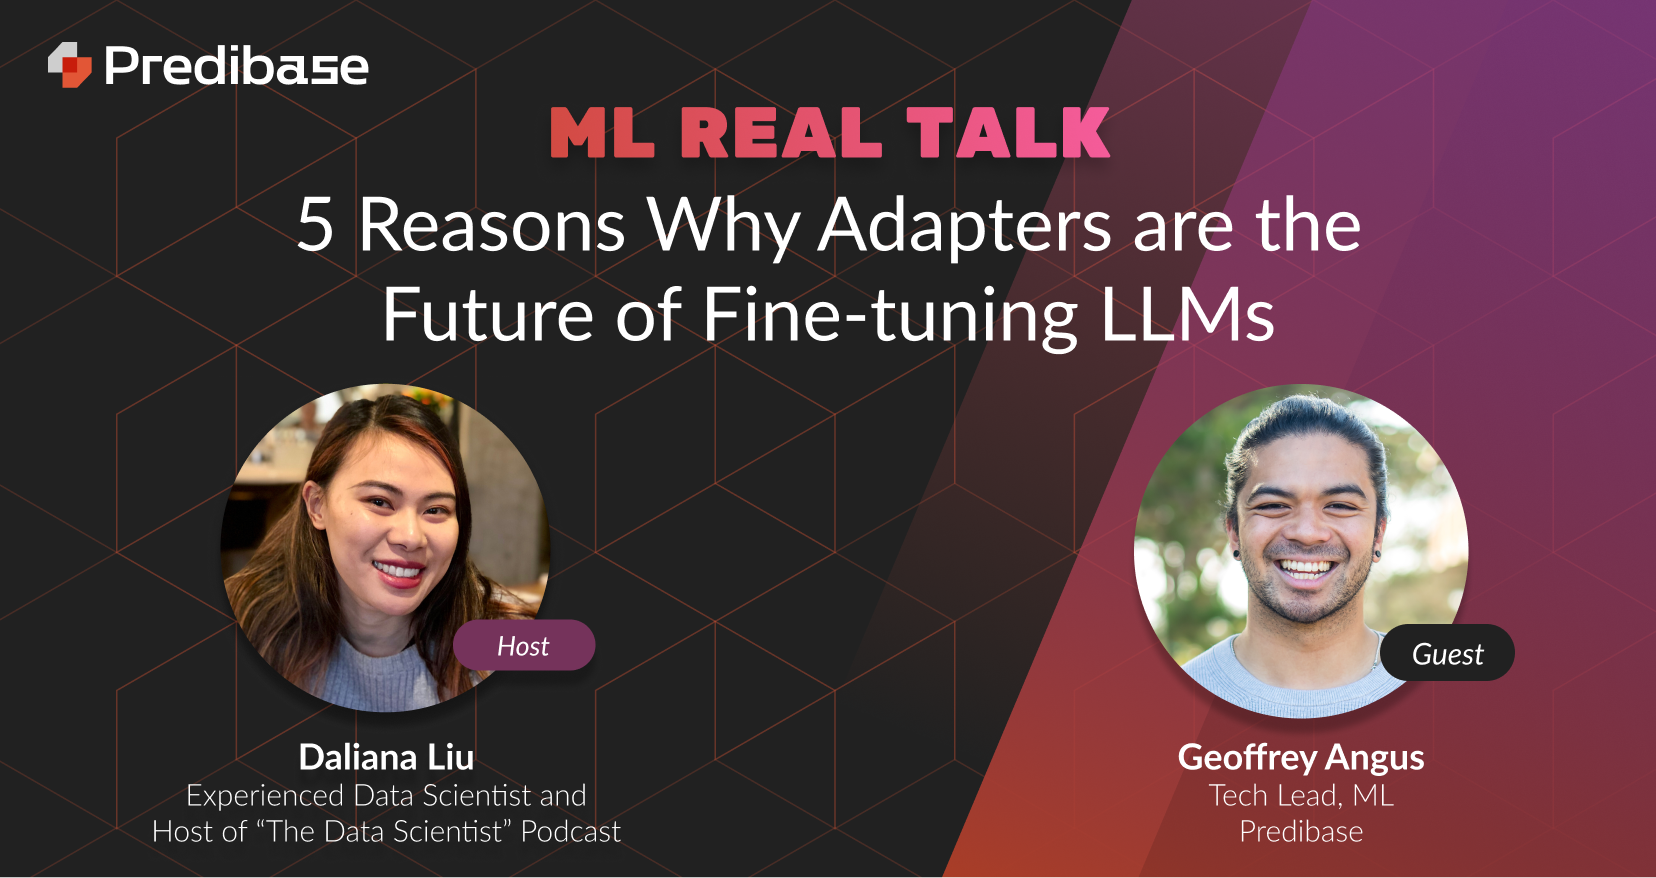 5 Reasons Why Adapters are the Future of Fine-tuning LLMs